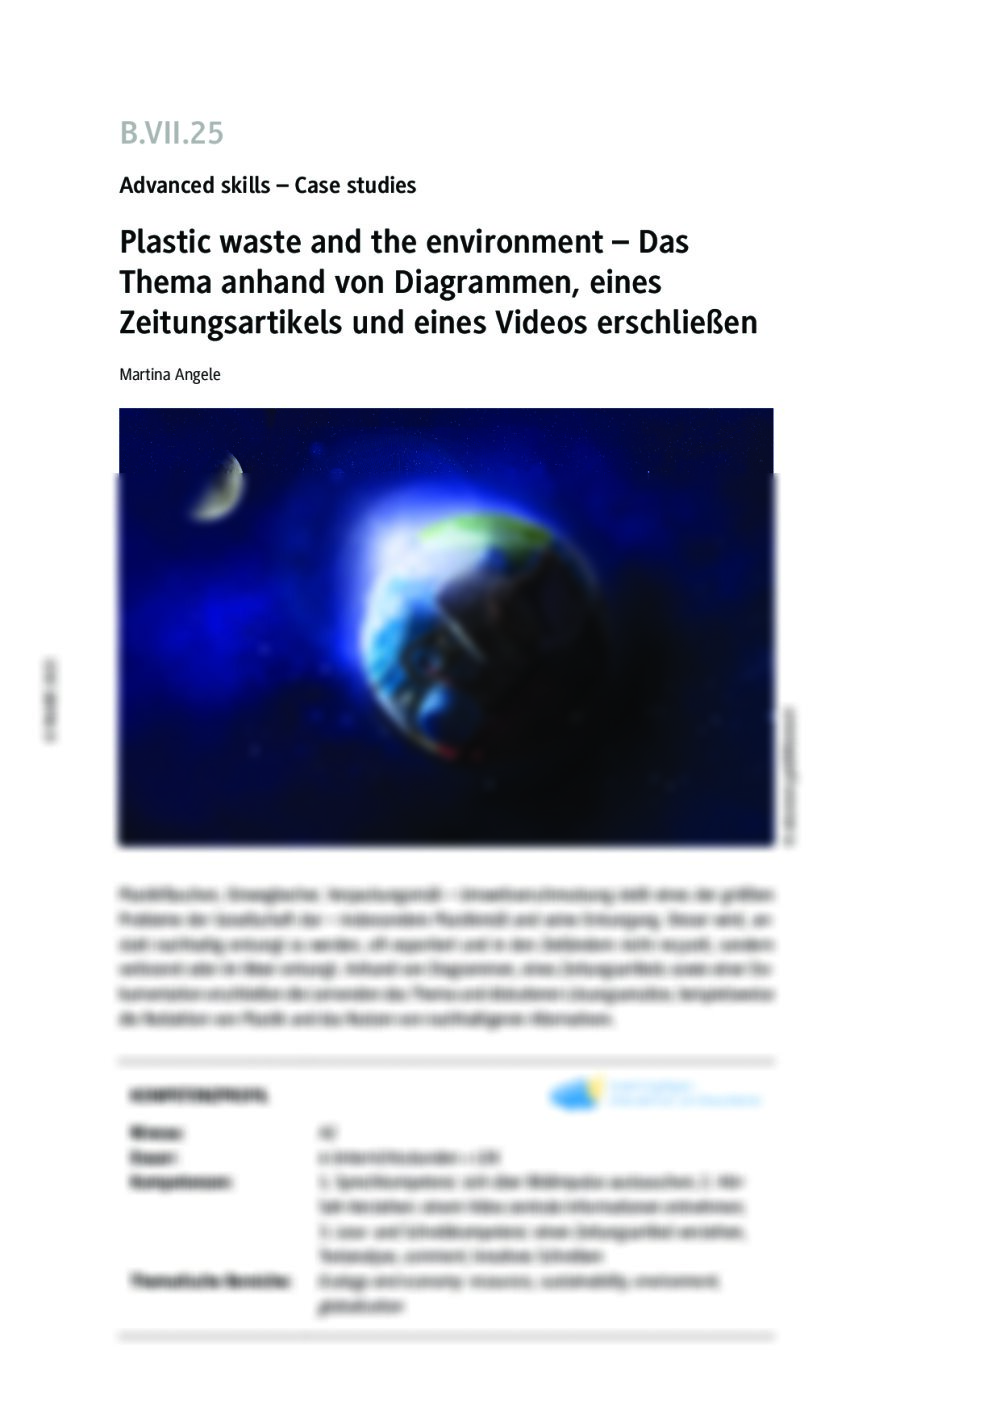 Plastic waste and the environment  - Seite 1